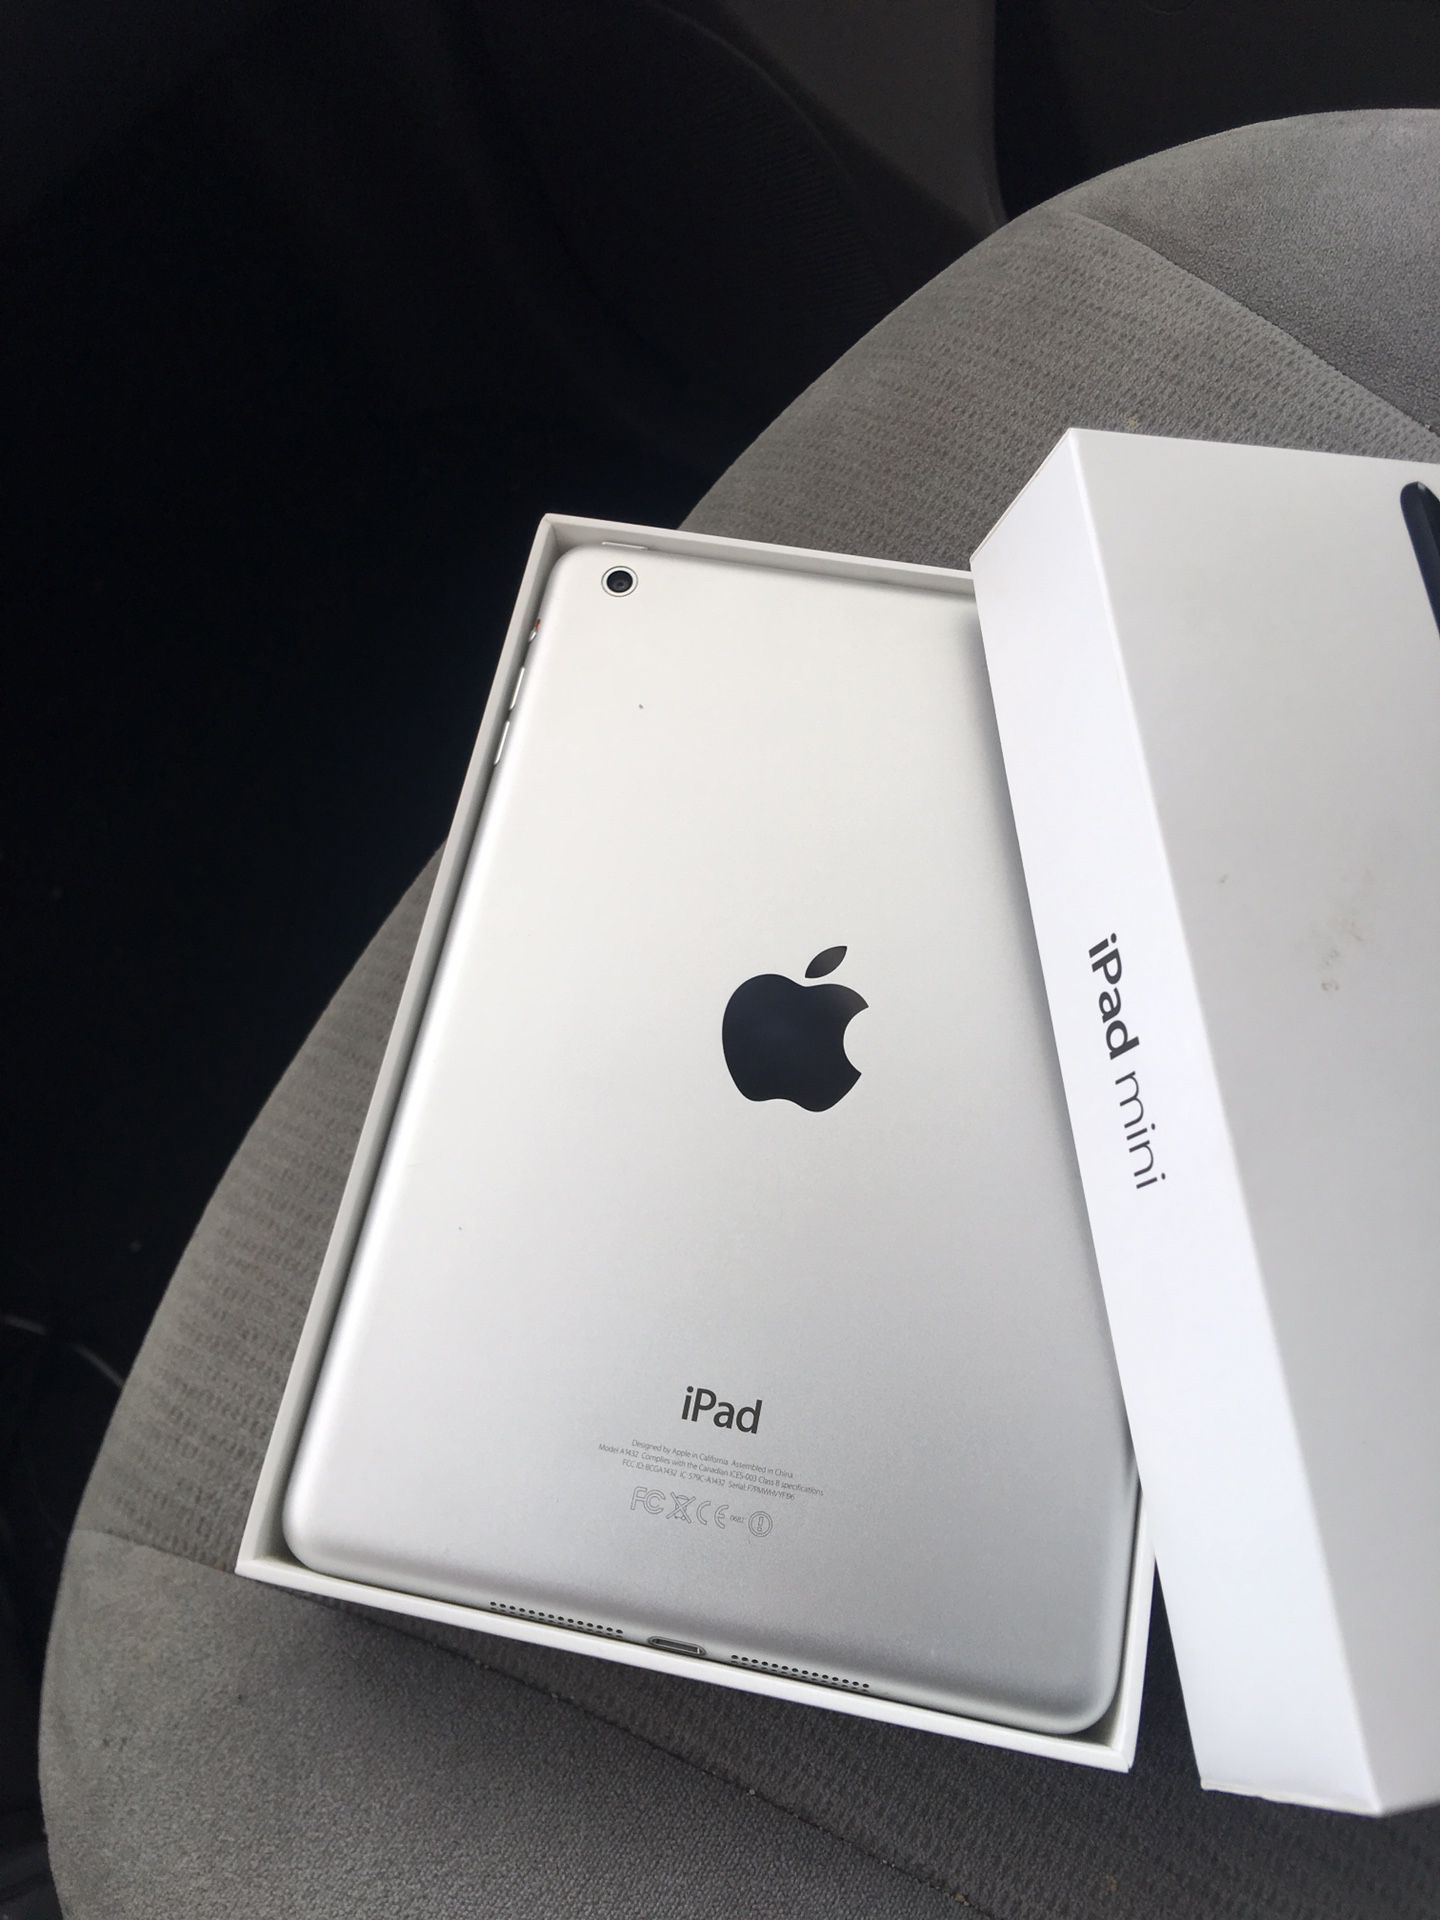 iPad mini 2 /16GB in box with charger all works perfect 129$ Firm price